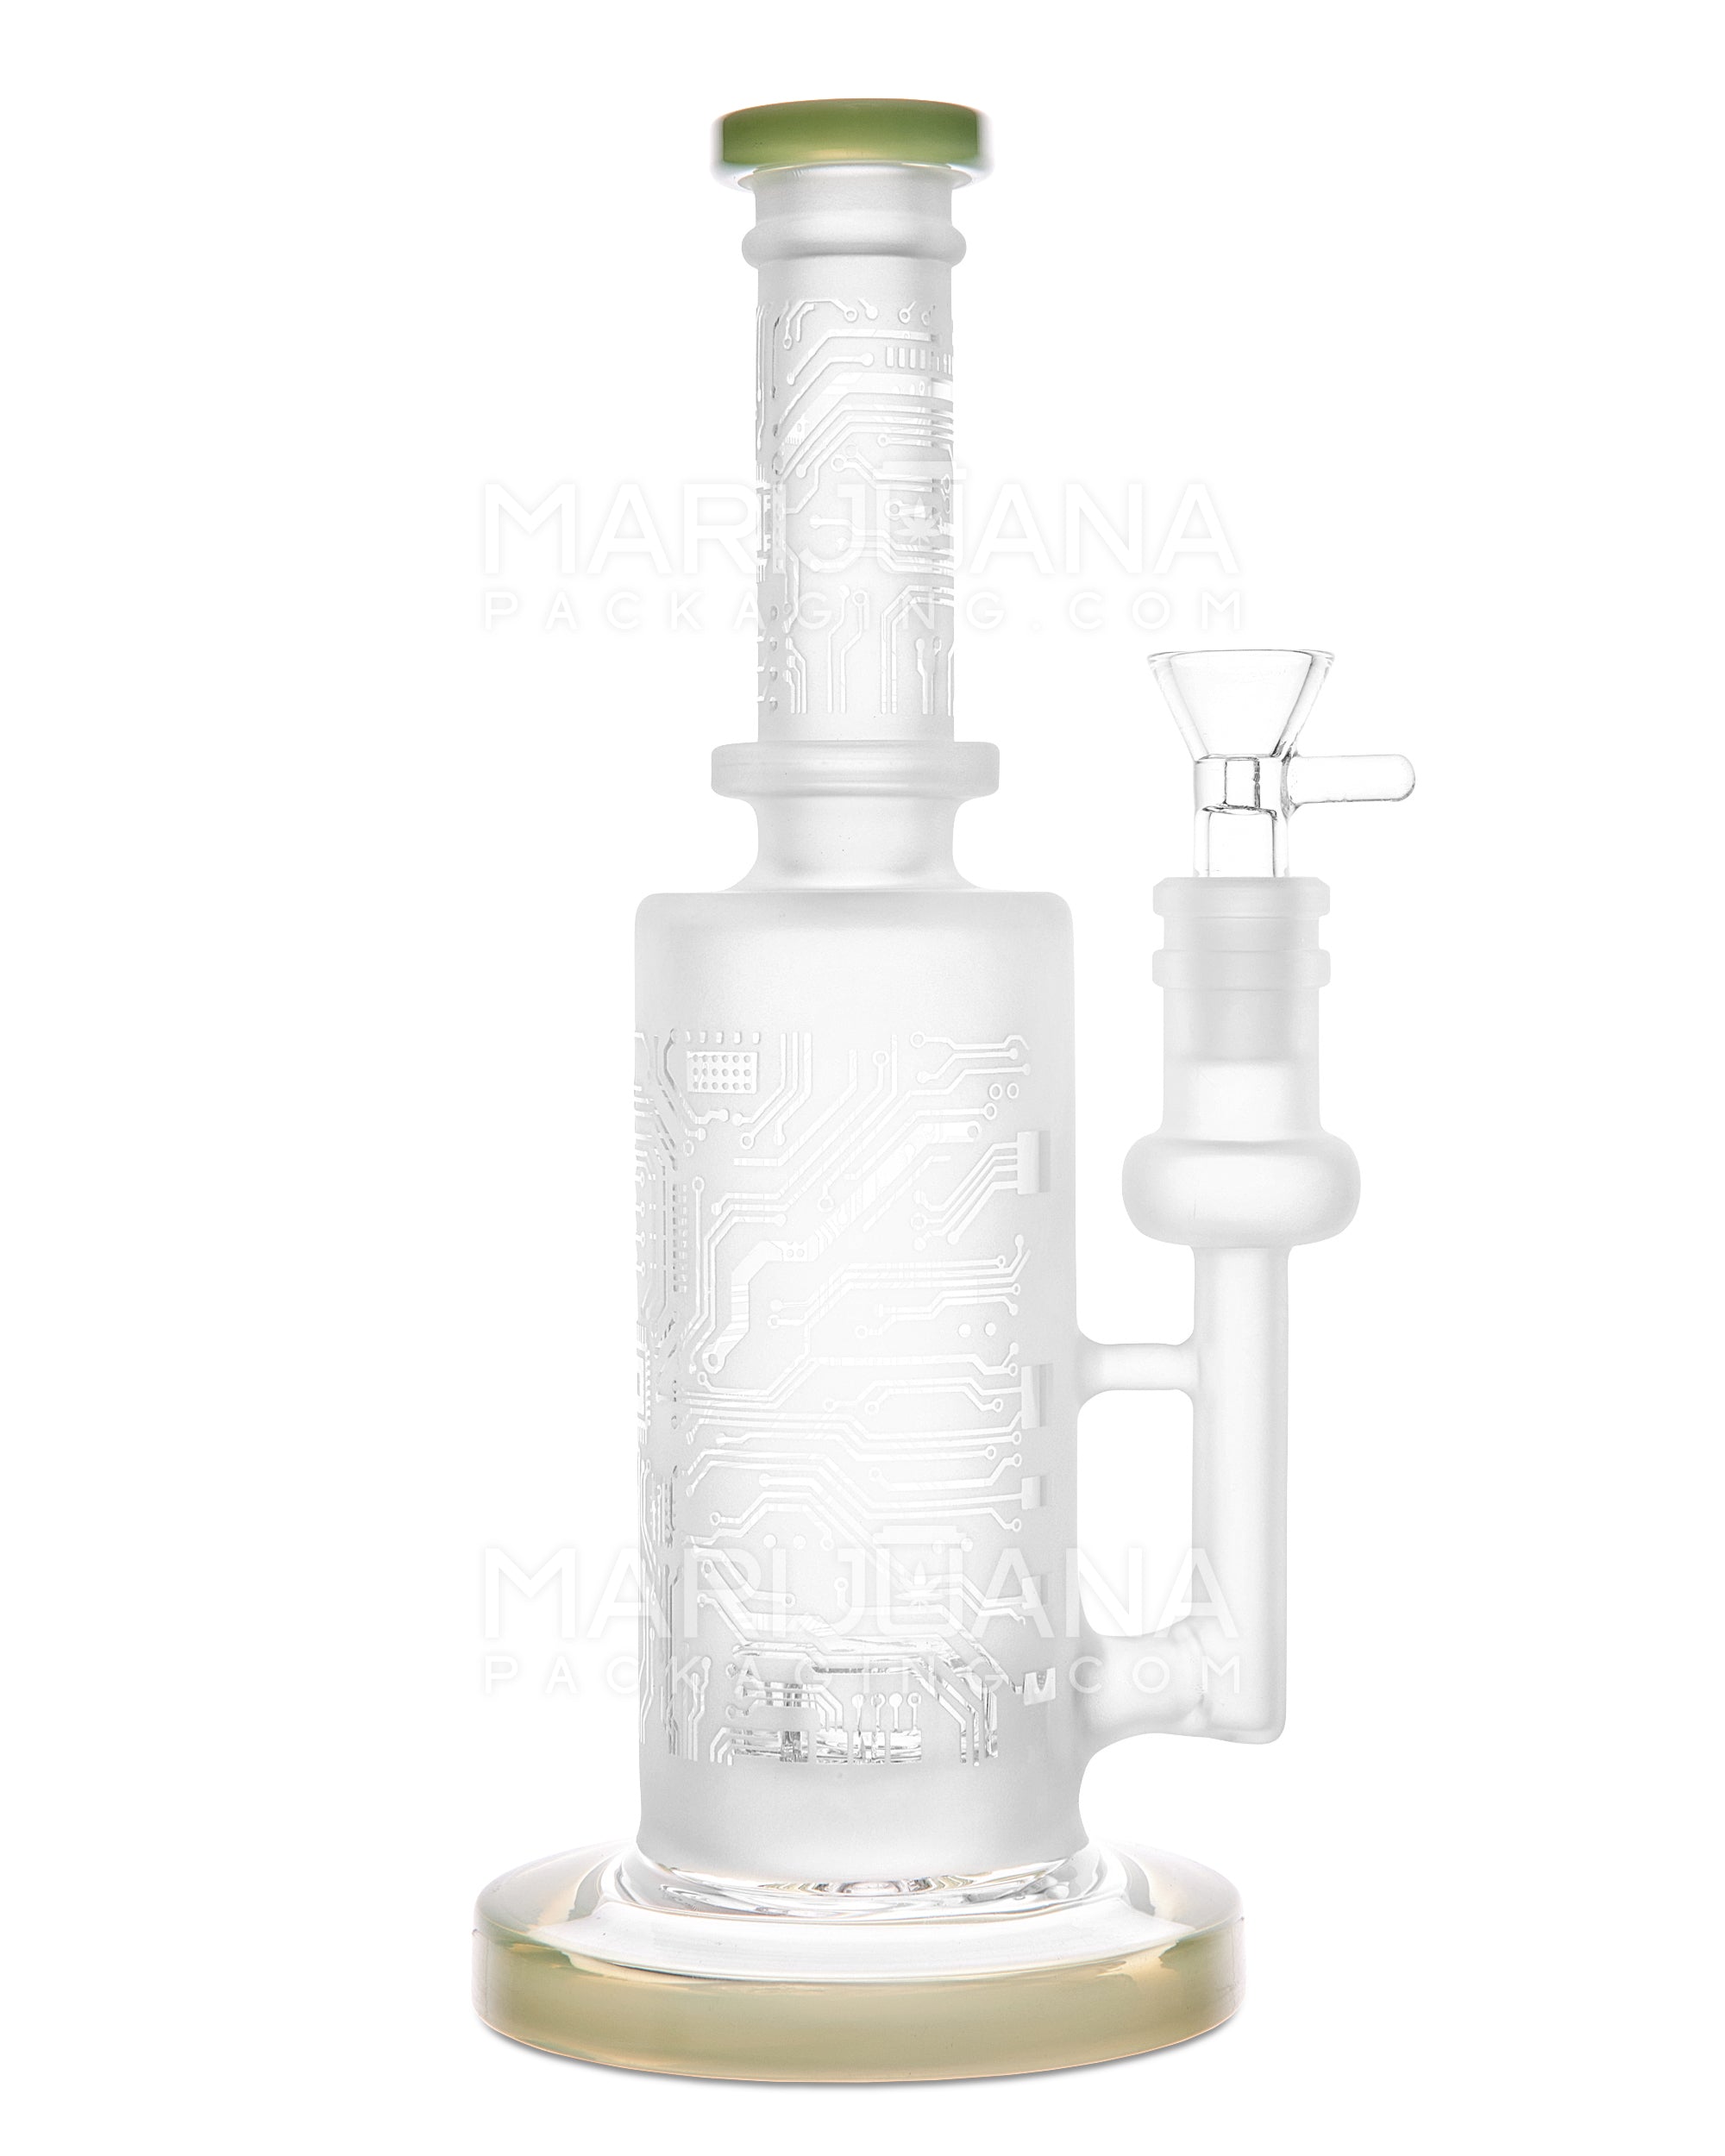 Straight Neck Sandblasted Circuitboard Showerhead Perc Glass Water Pipe w/ Thick Base | 9.5in Tall - 14mm Bowl - Slime - 1